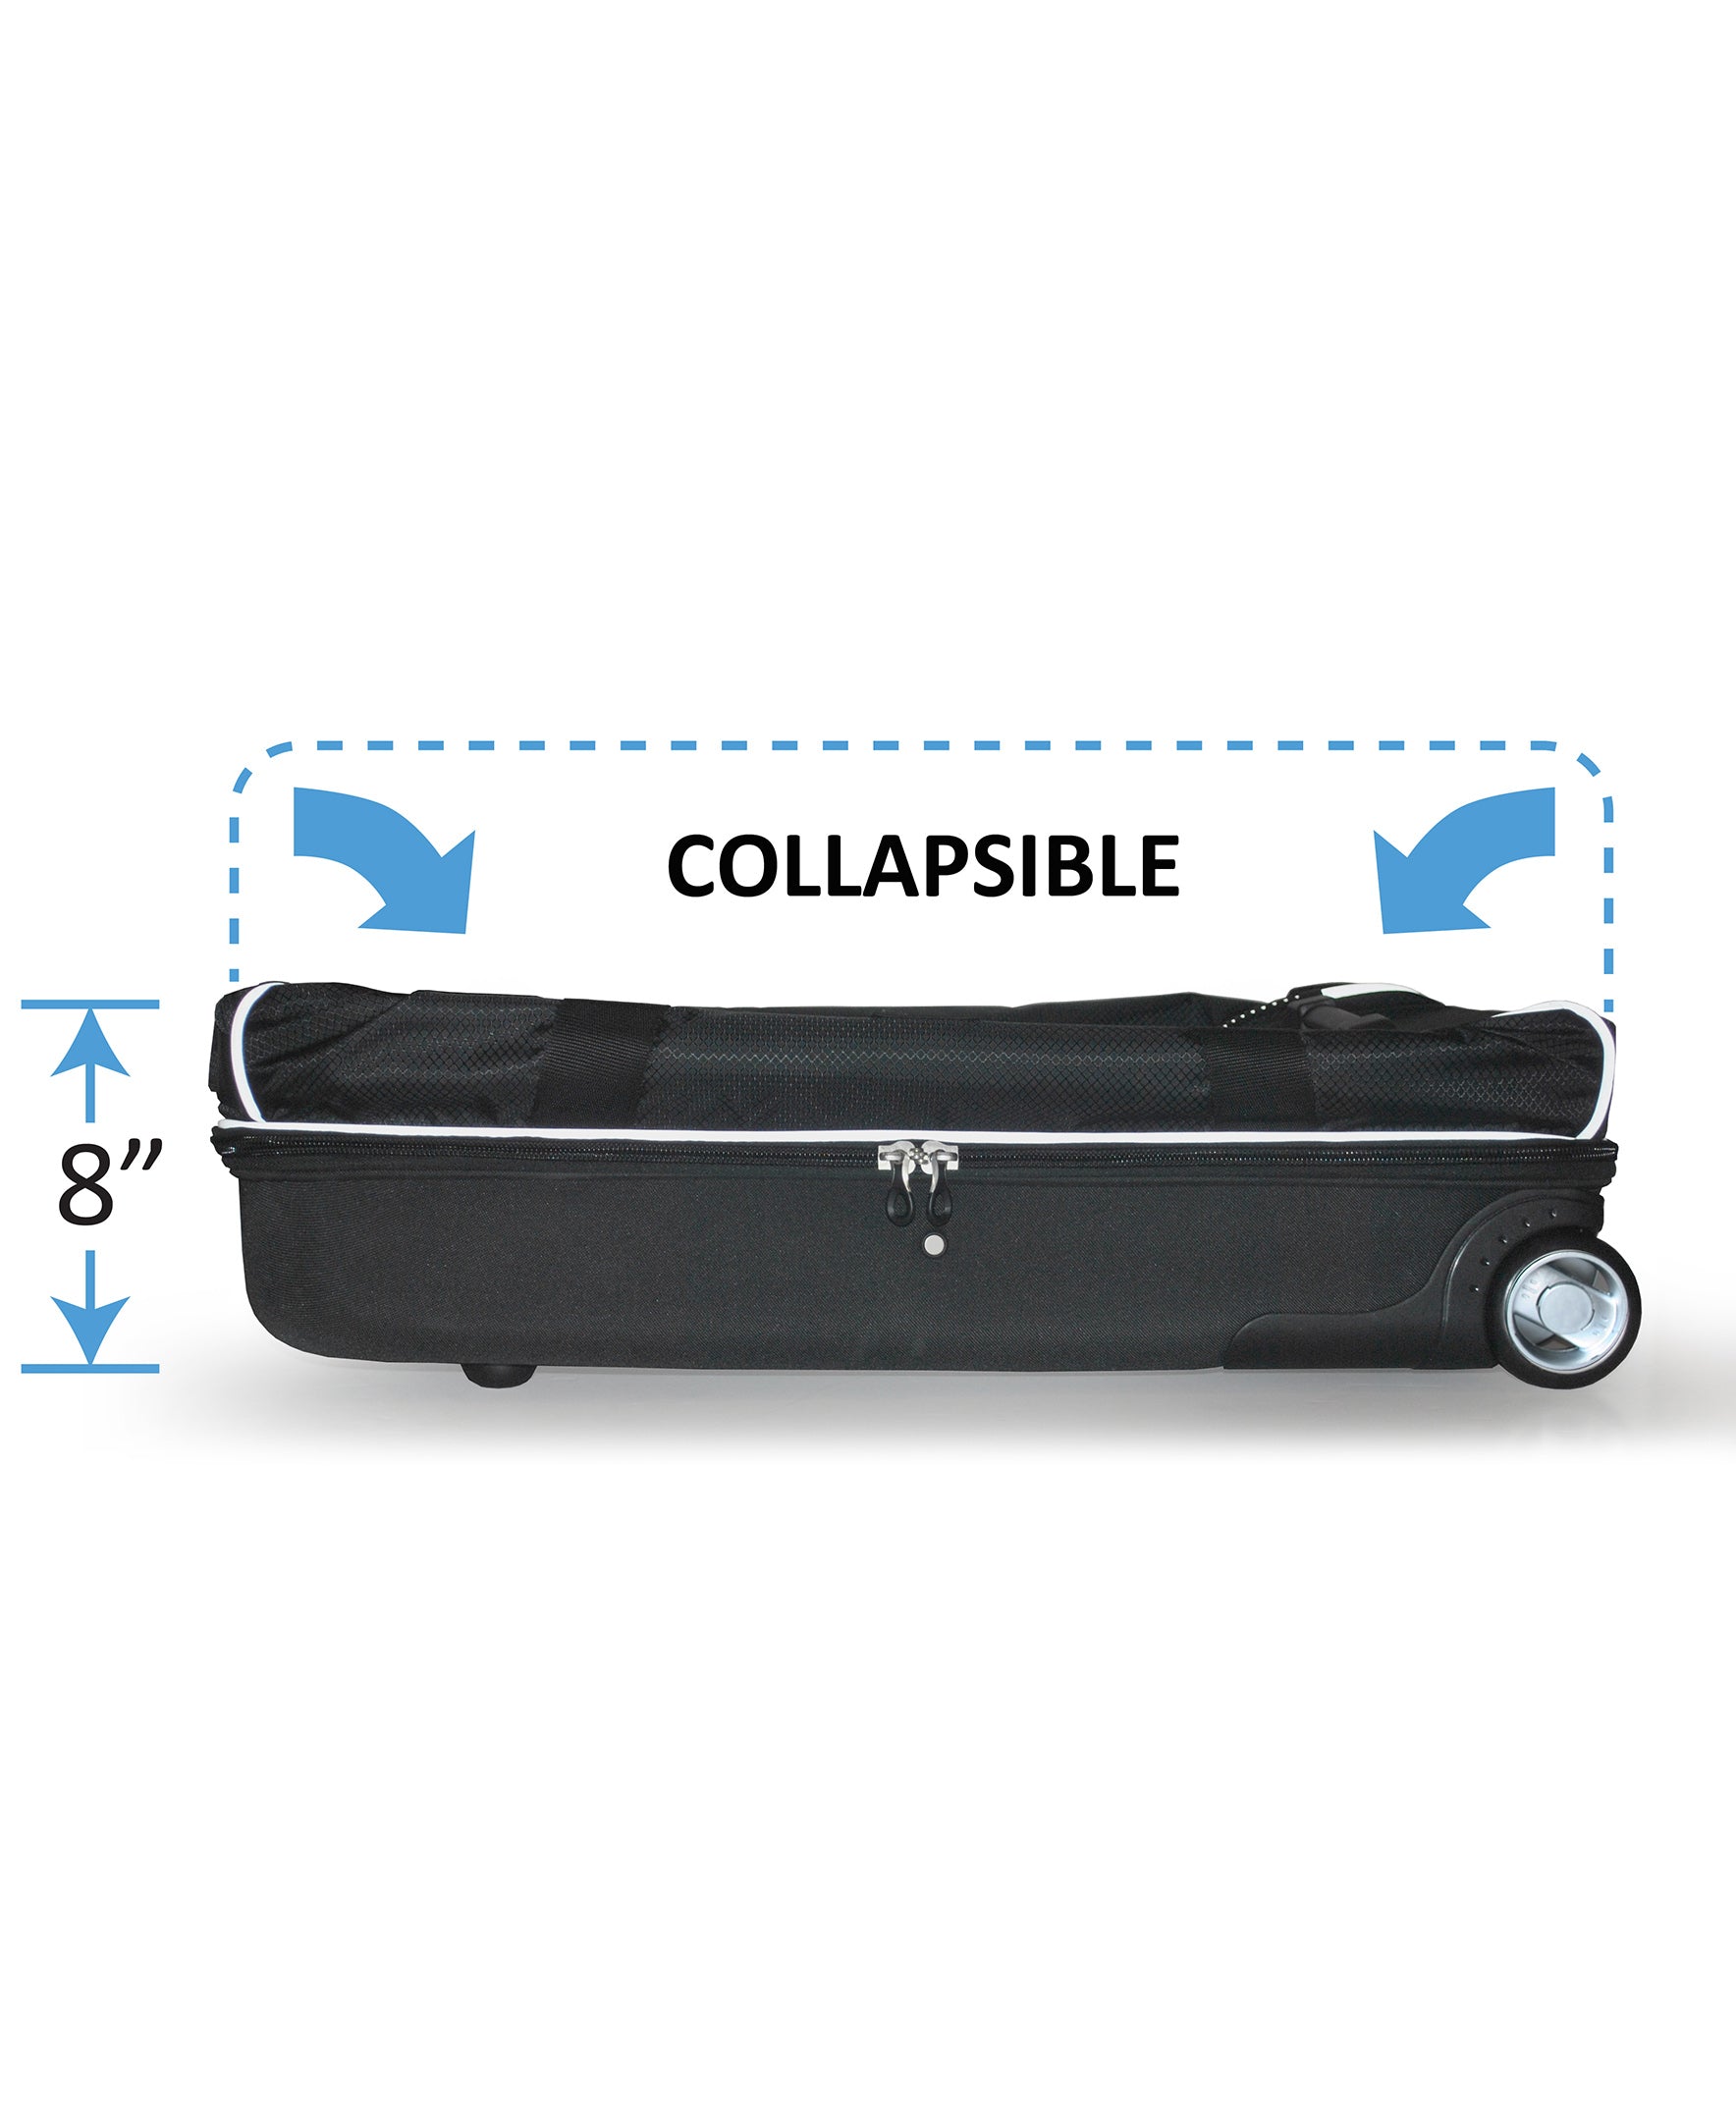 Collapsible Dance duffel with garment rack